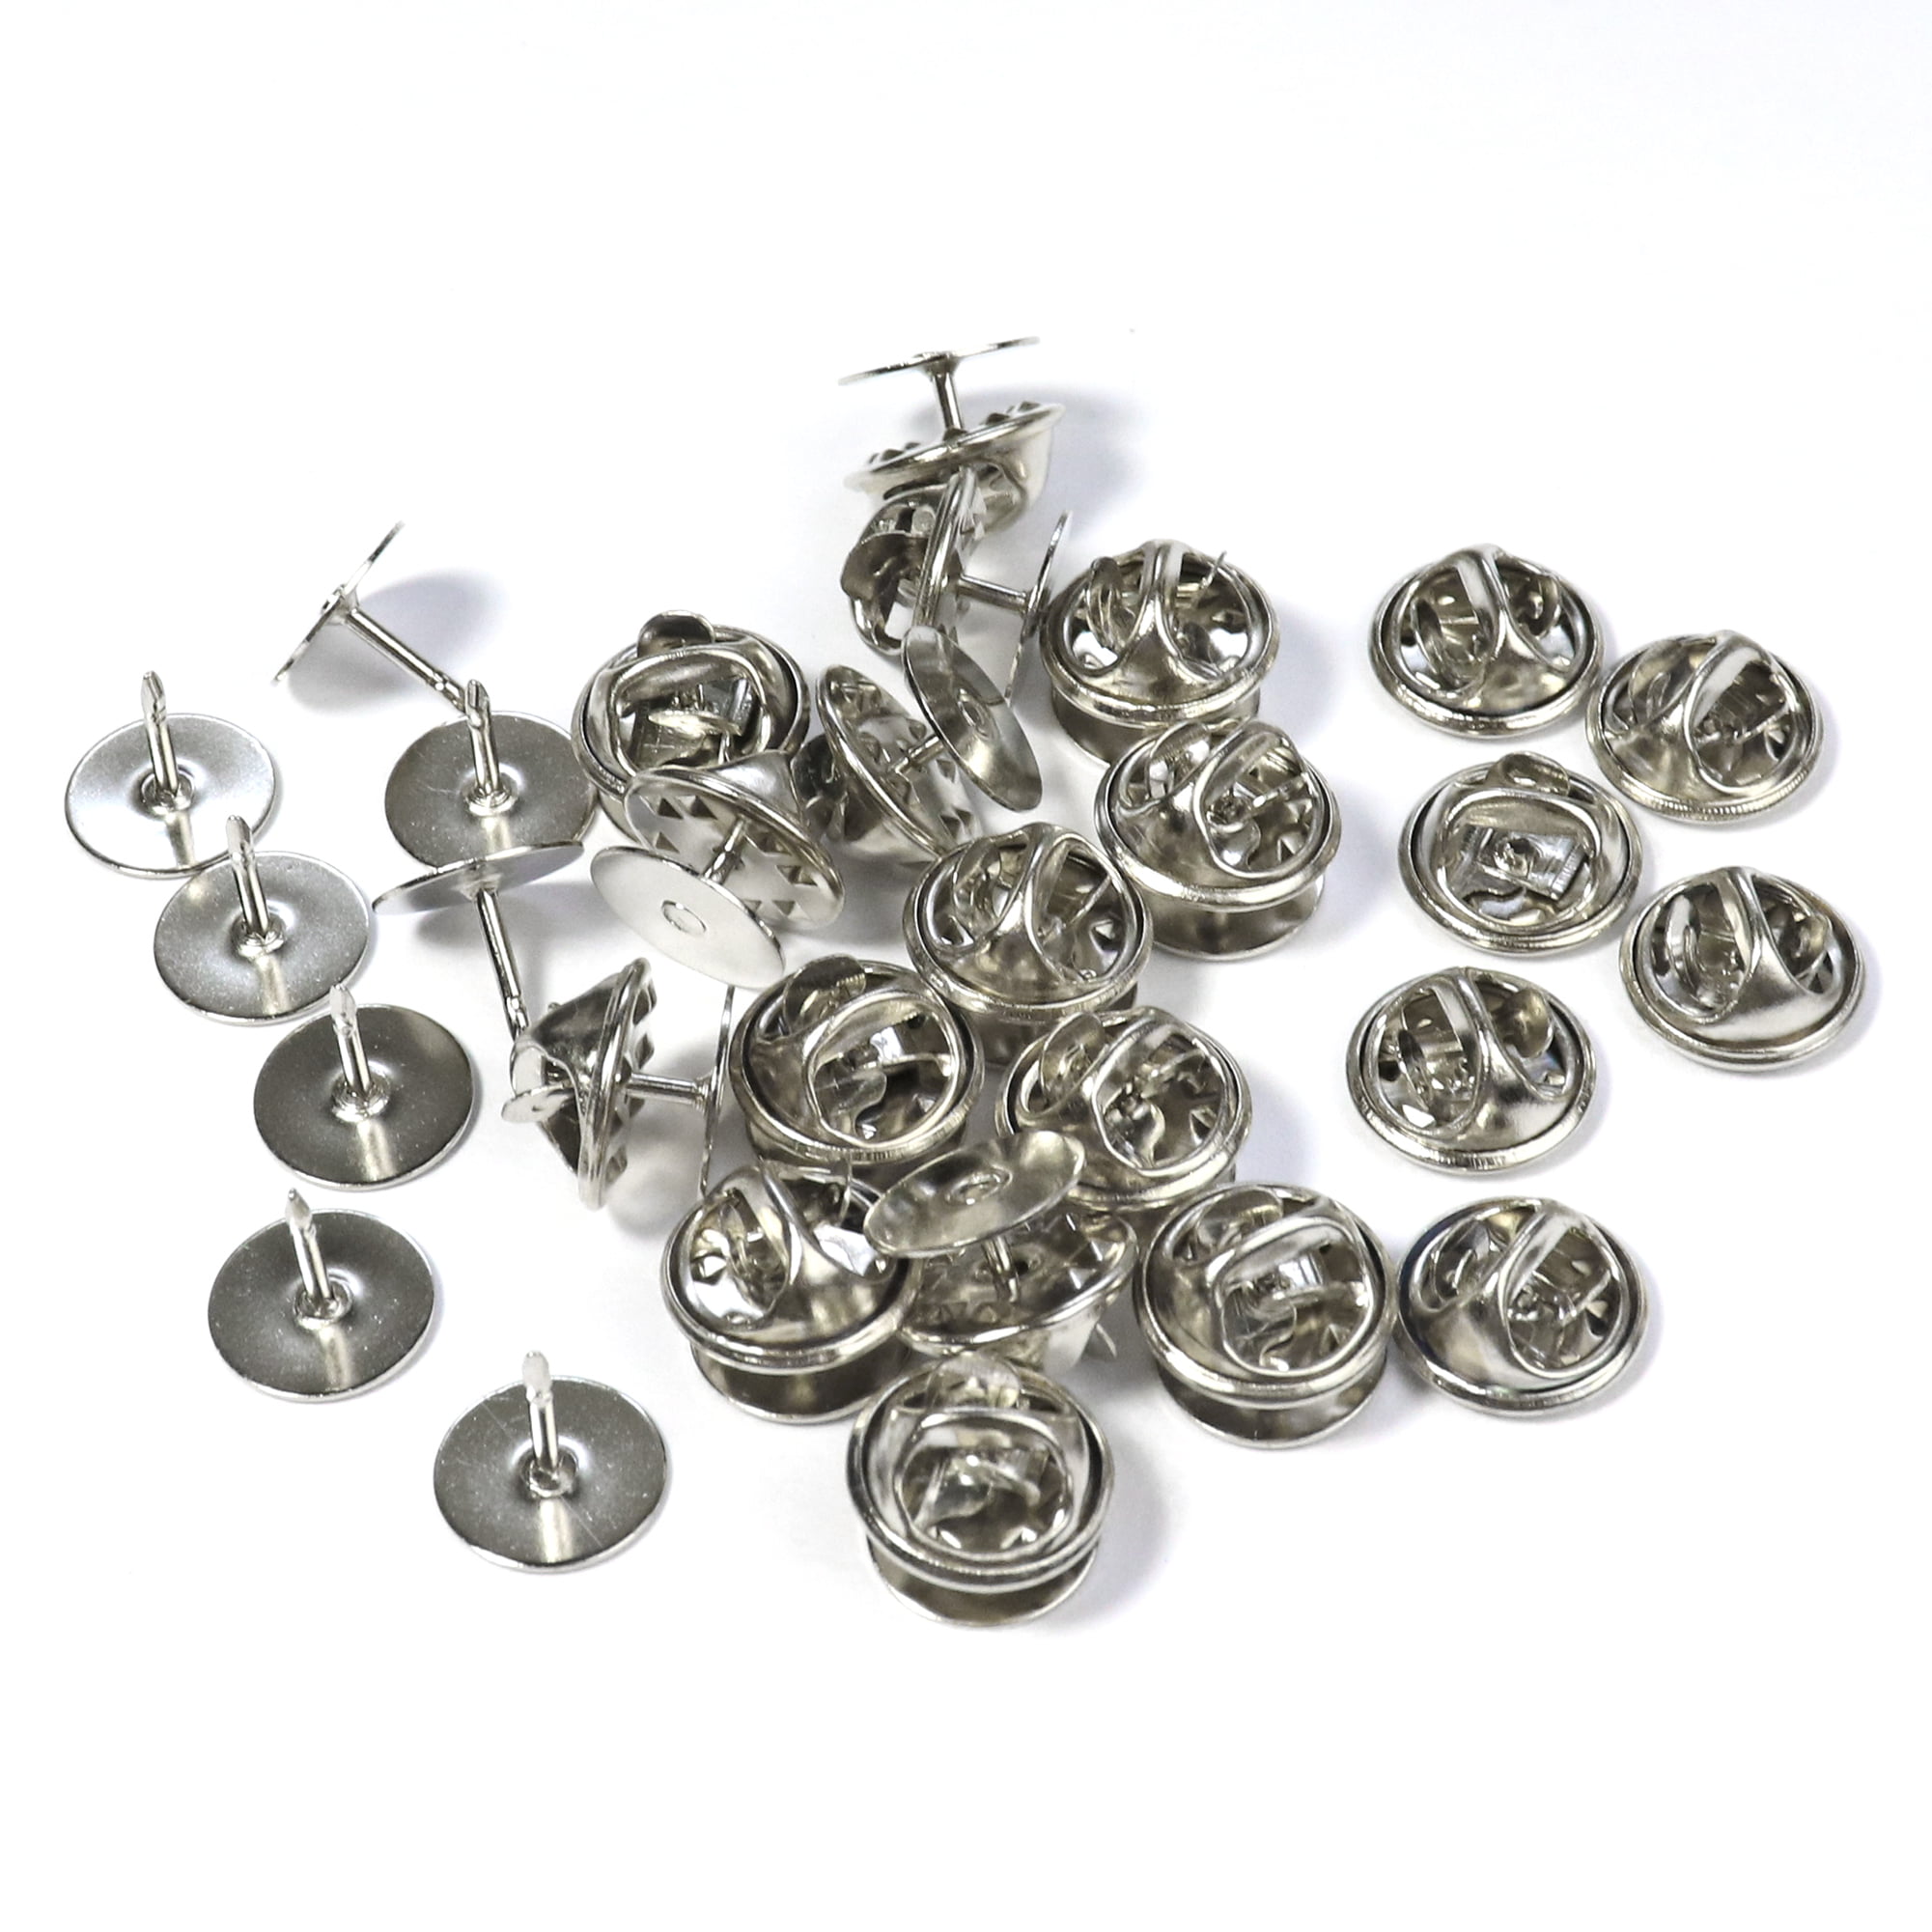 120 Pairs Butterfly Clutch Tie Tacks Pin Back Replacement with 8mm Length Blank Pins for Craft Making (Silver)